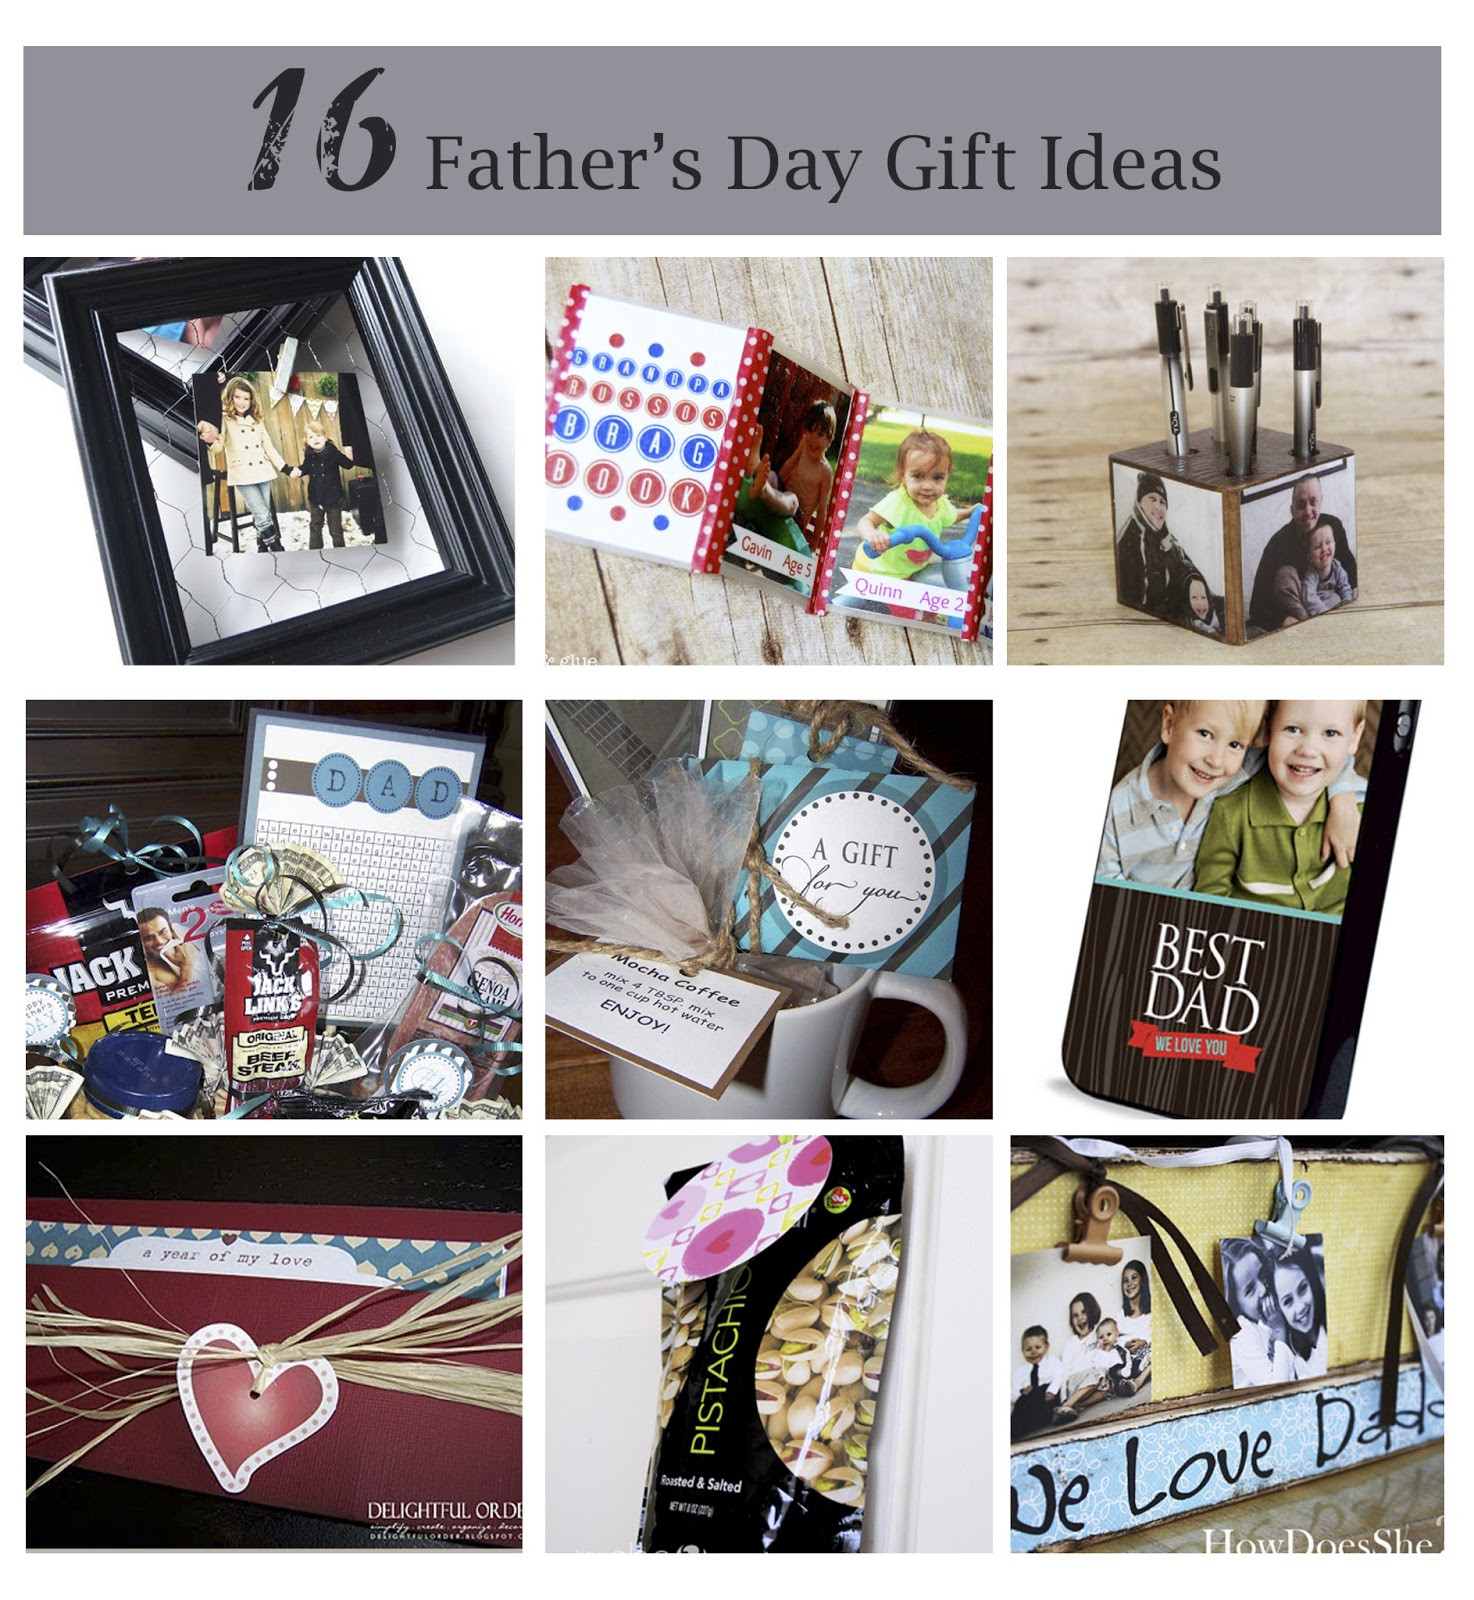 Amazon Fathers Day Gift Ideas
 Delightful Order 16 Father s Day Gift Ideas